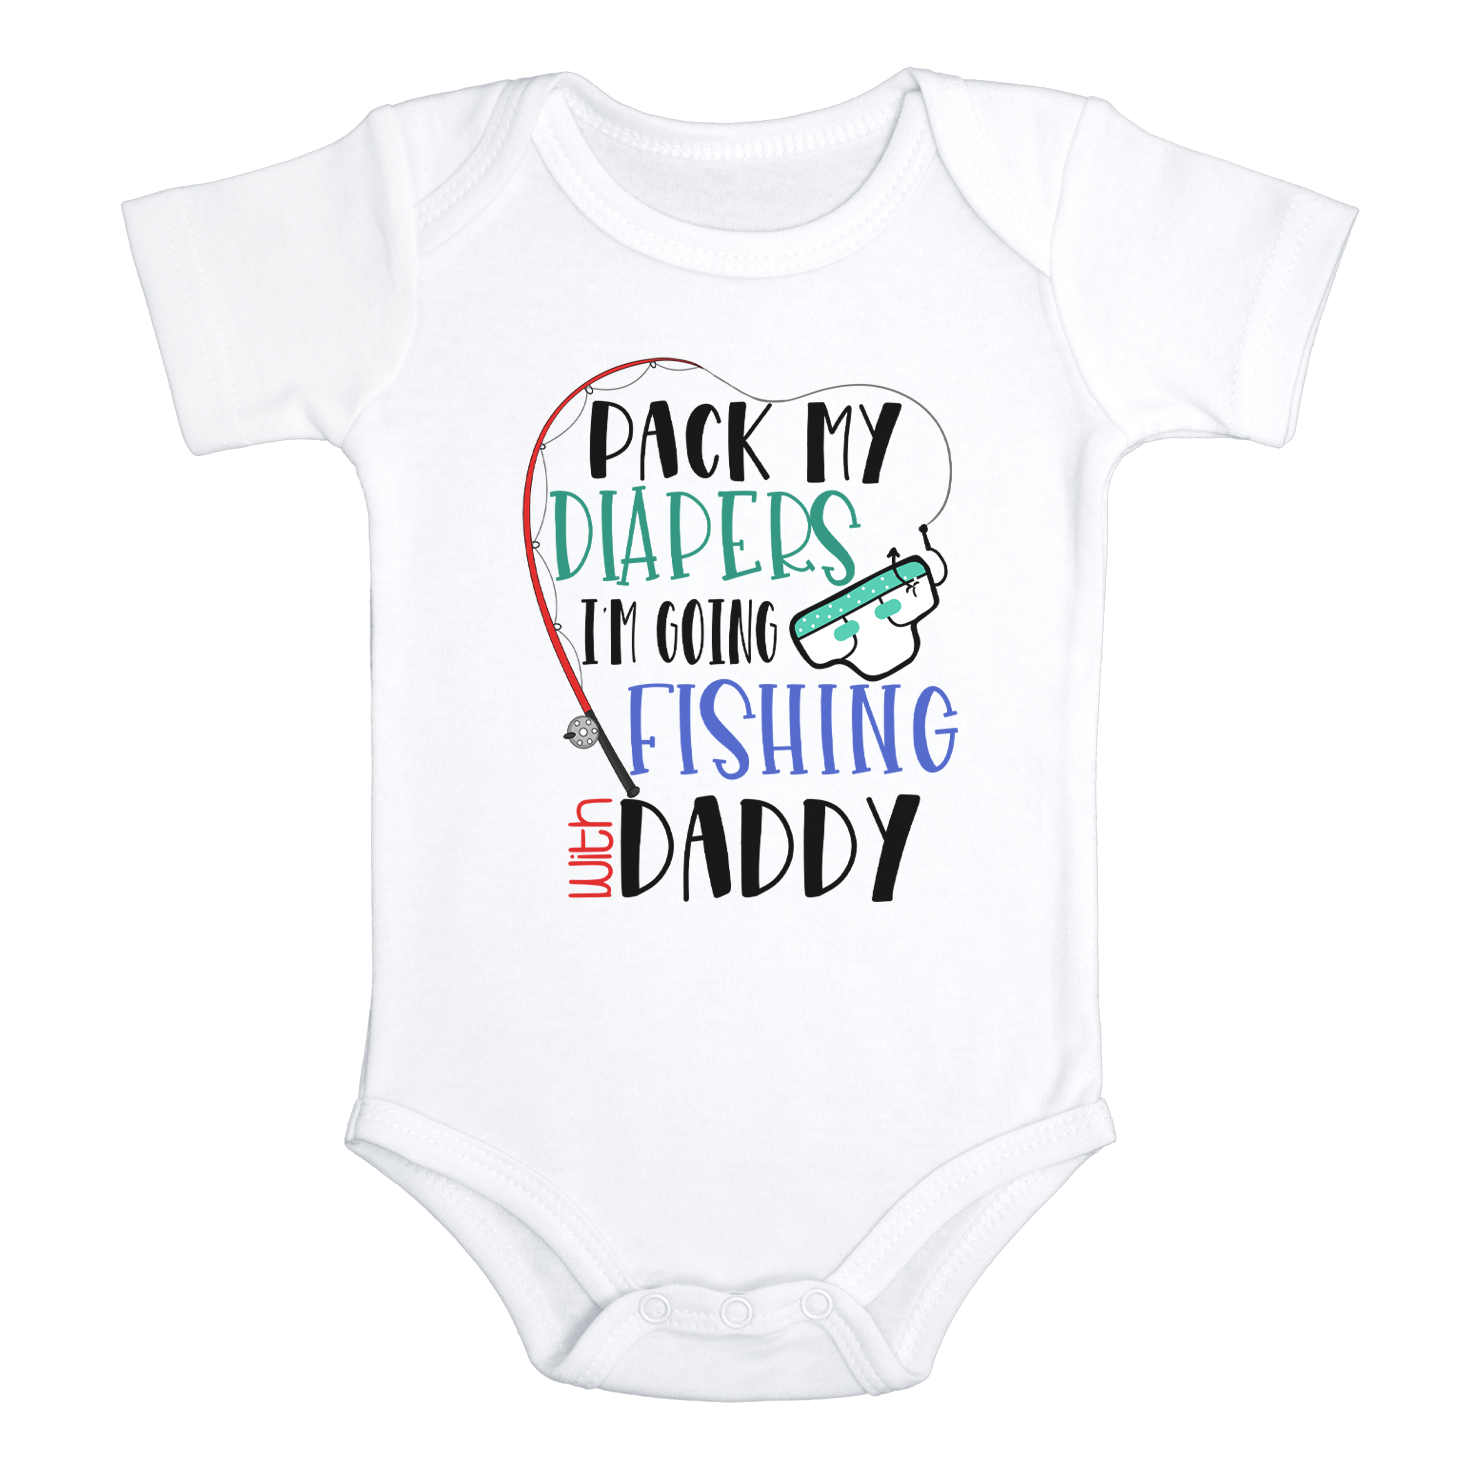 PACK MY DIAPERS I'M GOING FISHING WITH DADDY Funny baby onesies fish bodysuit (white: short or long sleeve) - HappyAddition